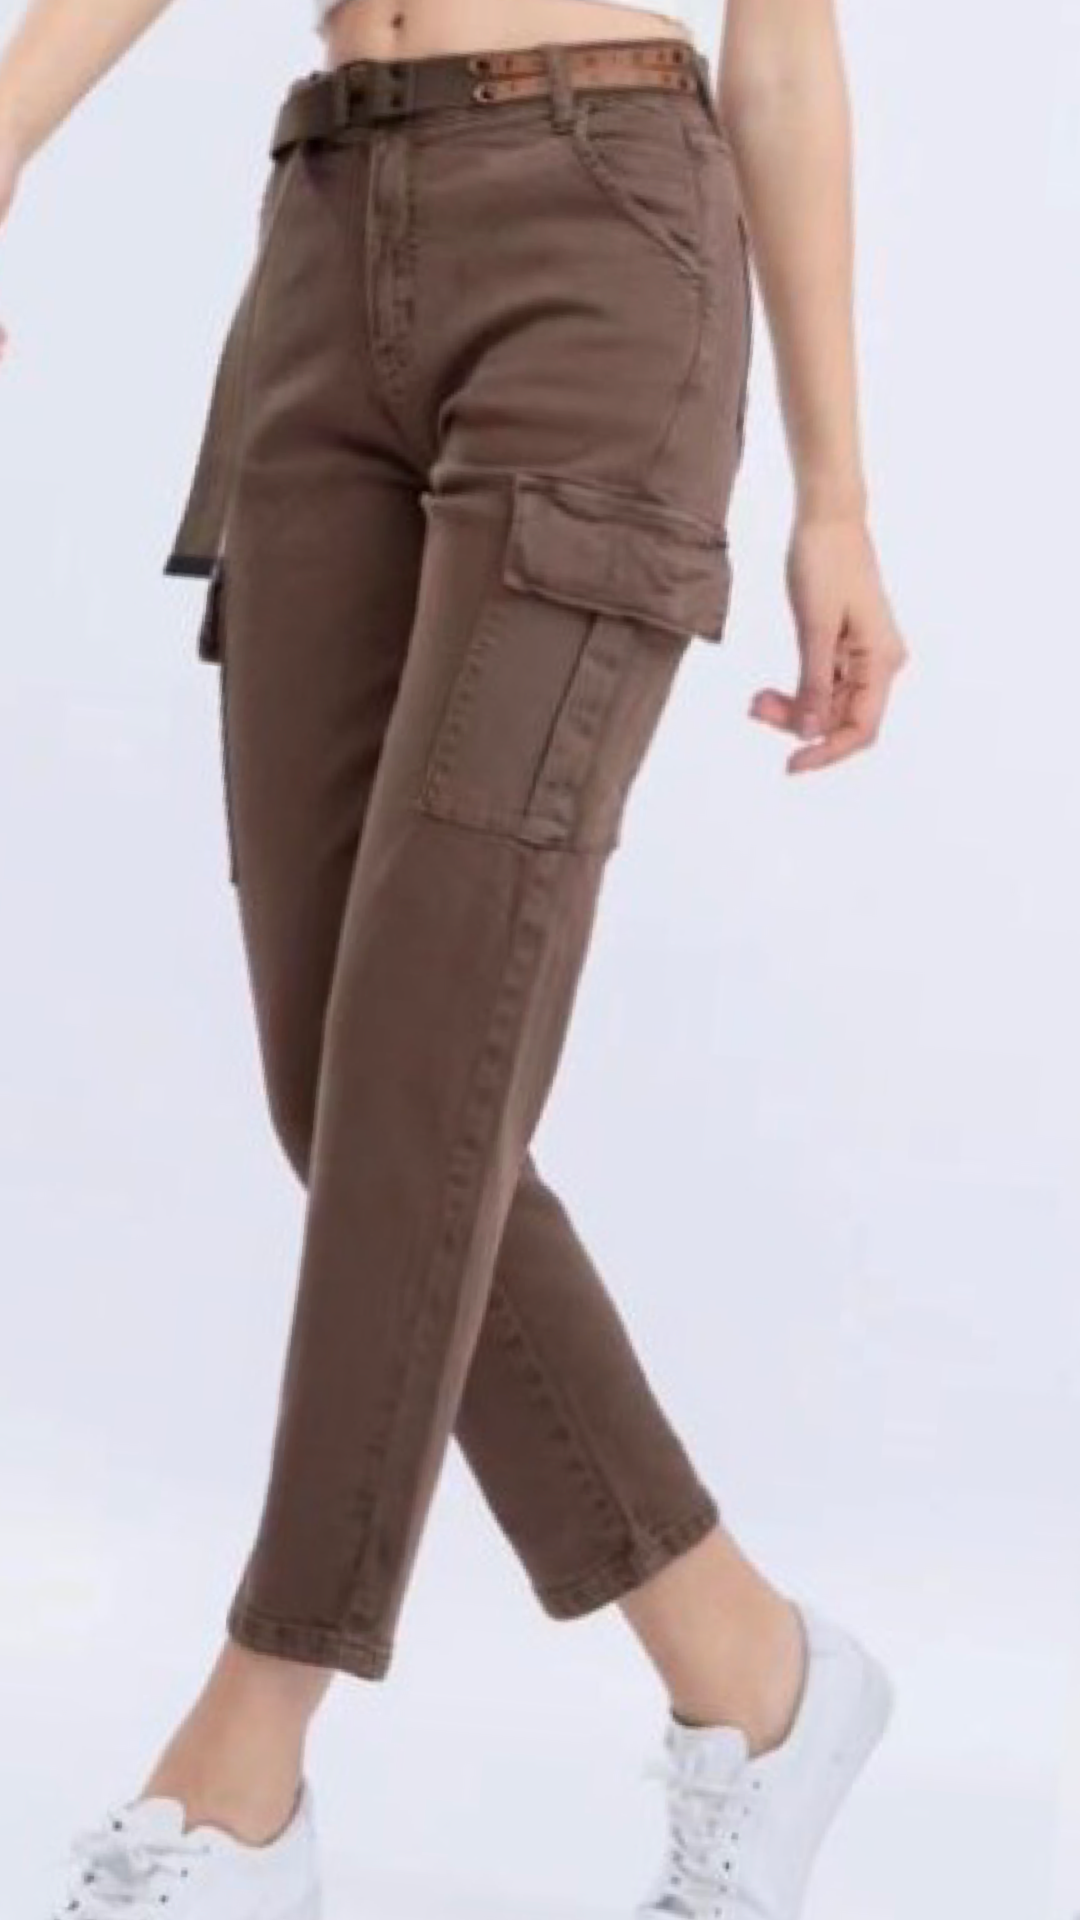 Fashionable and Comfortable Women's Pants for Every Occasion